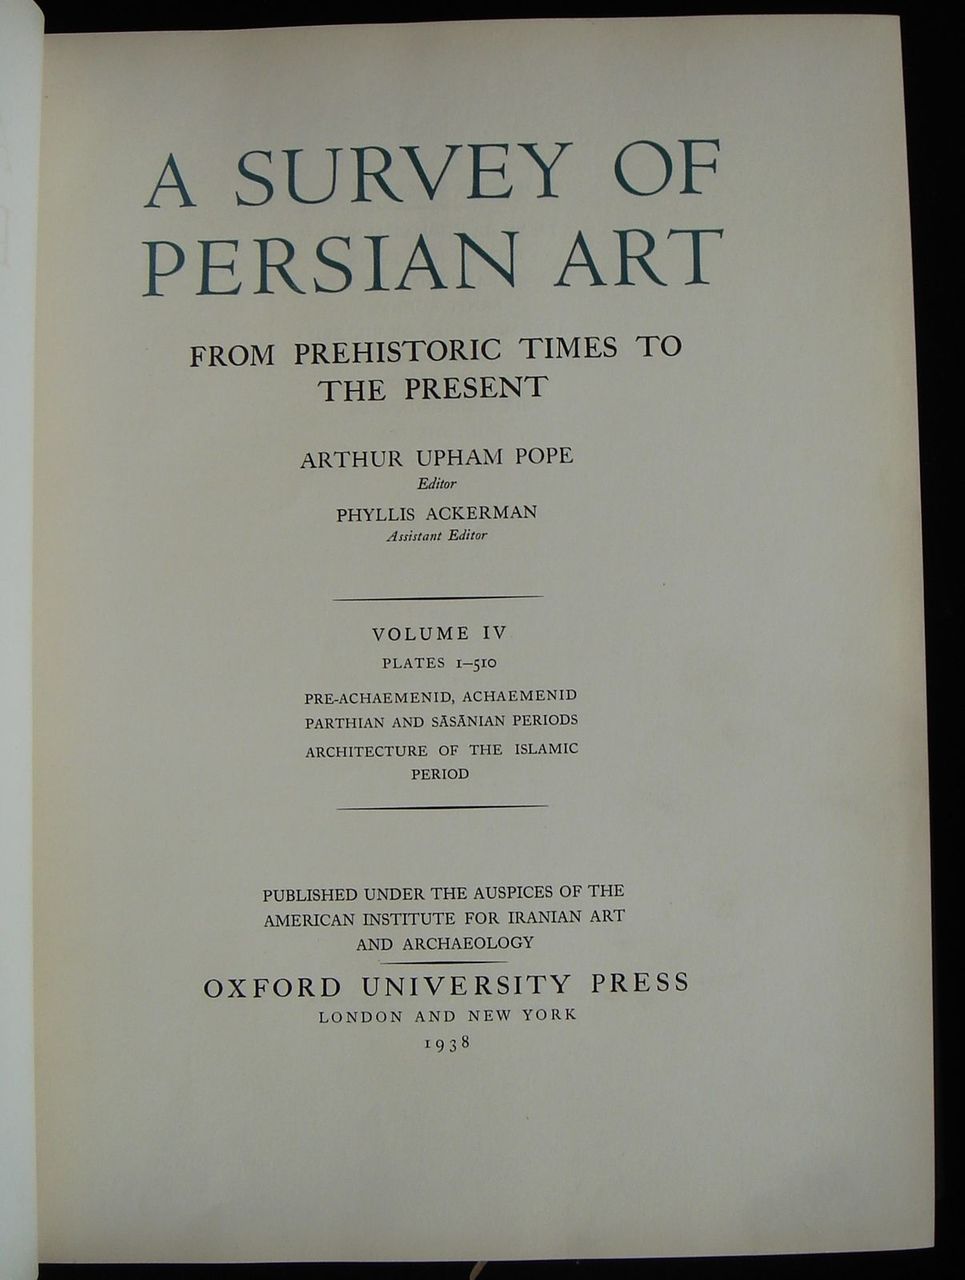 Persian Painting 洋書